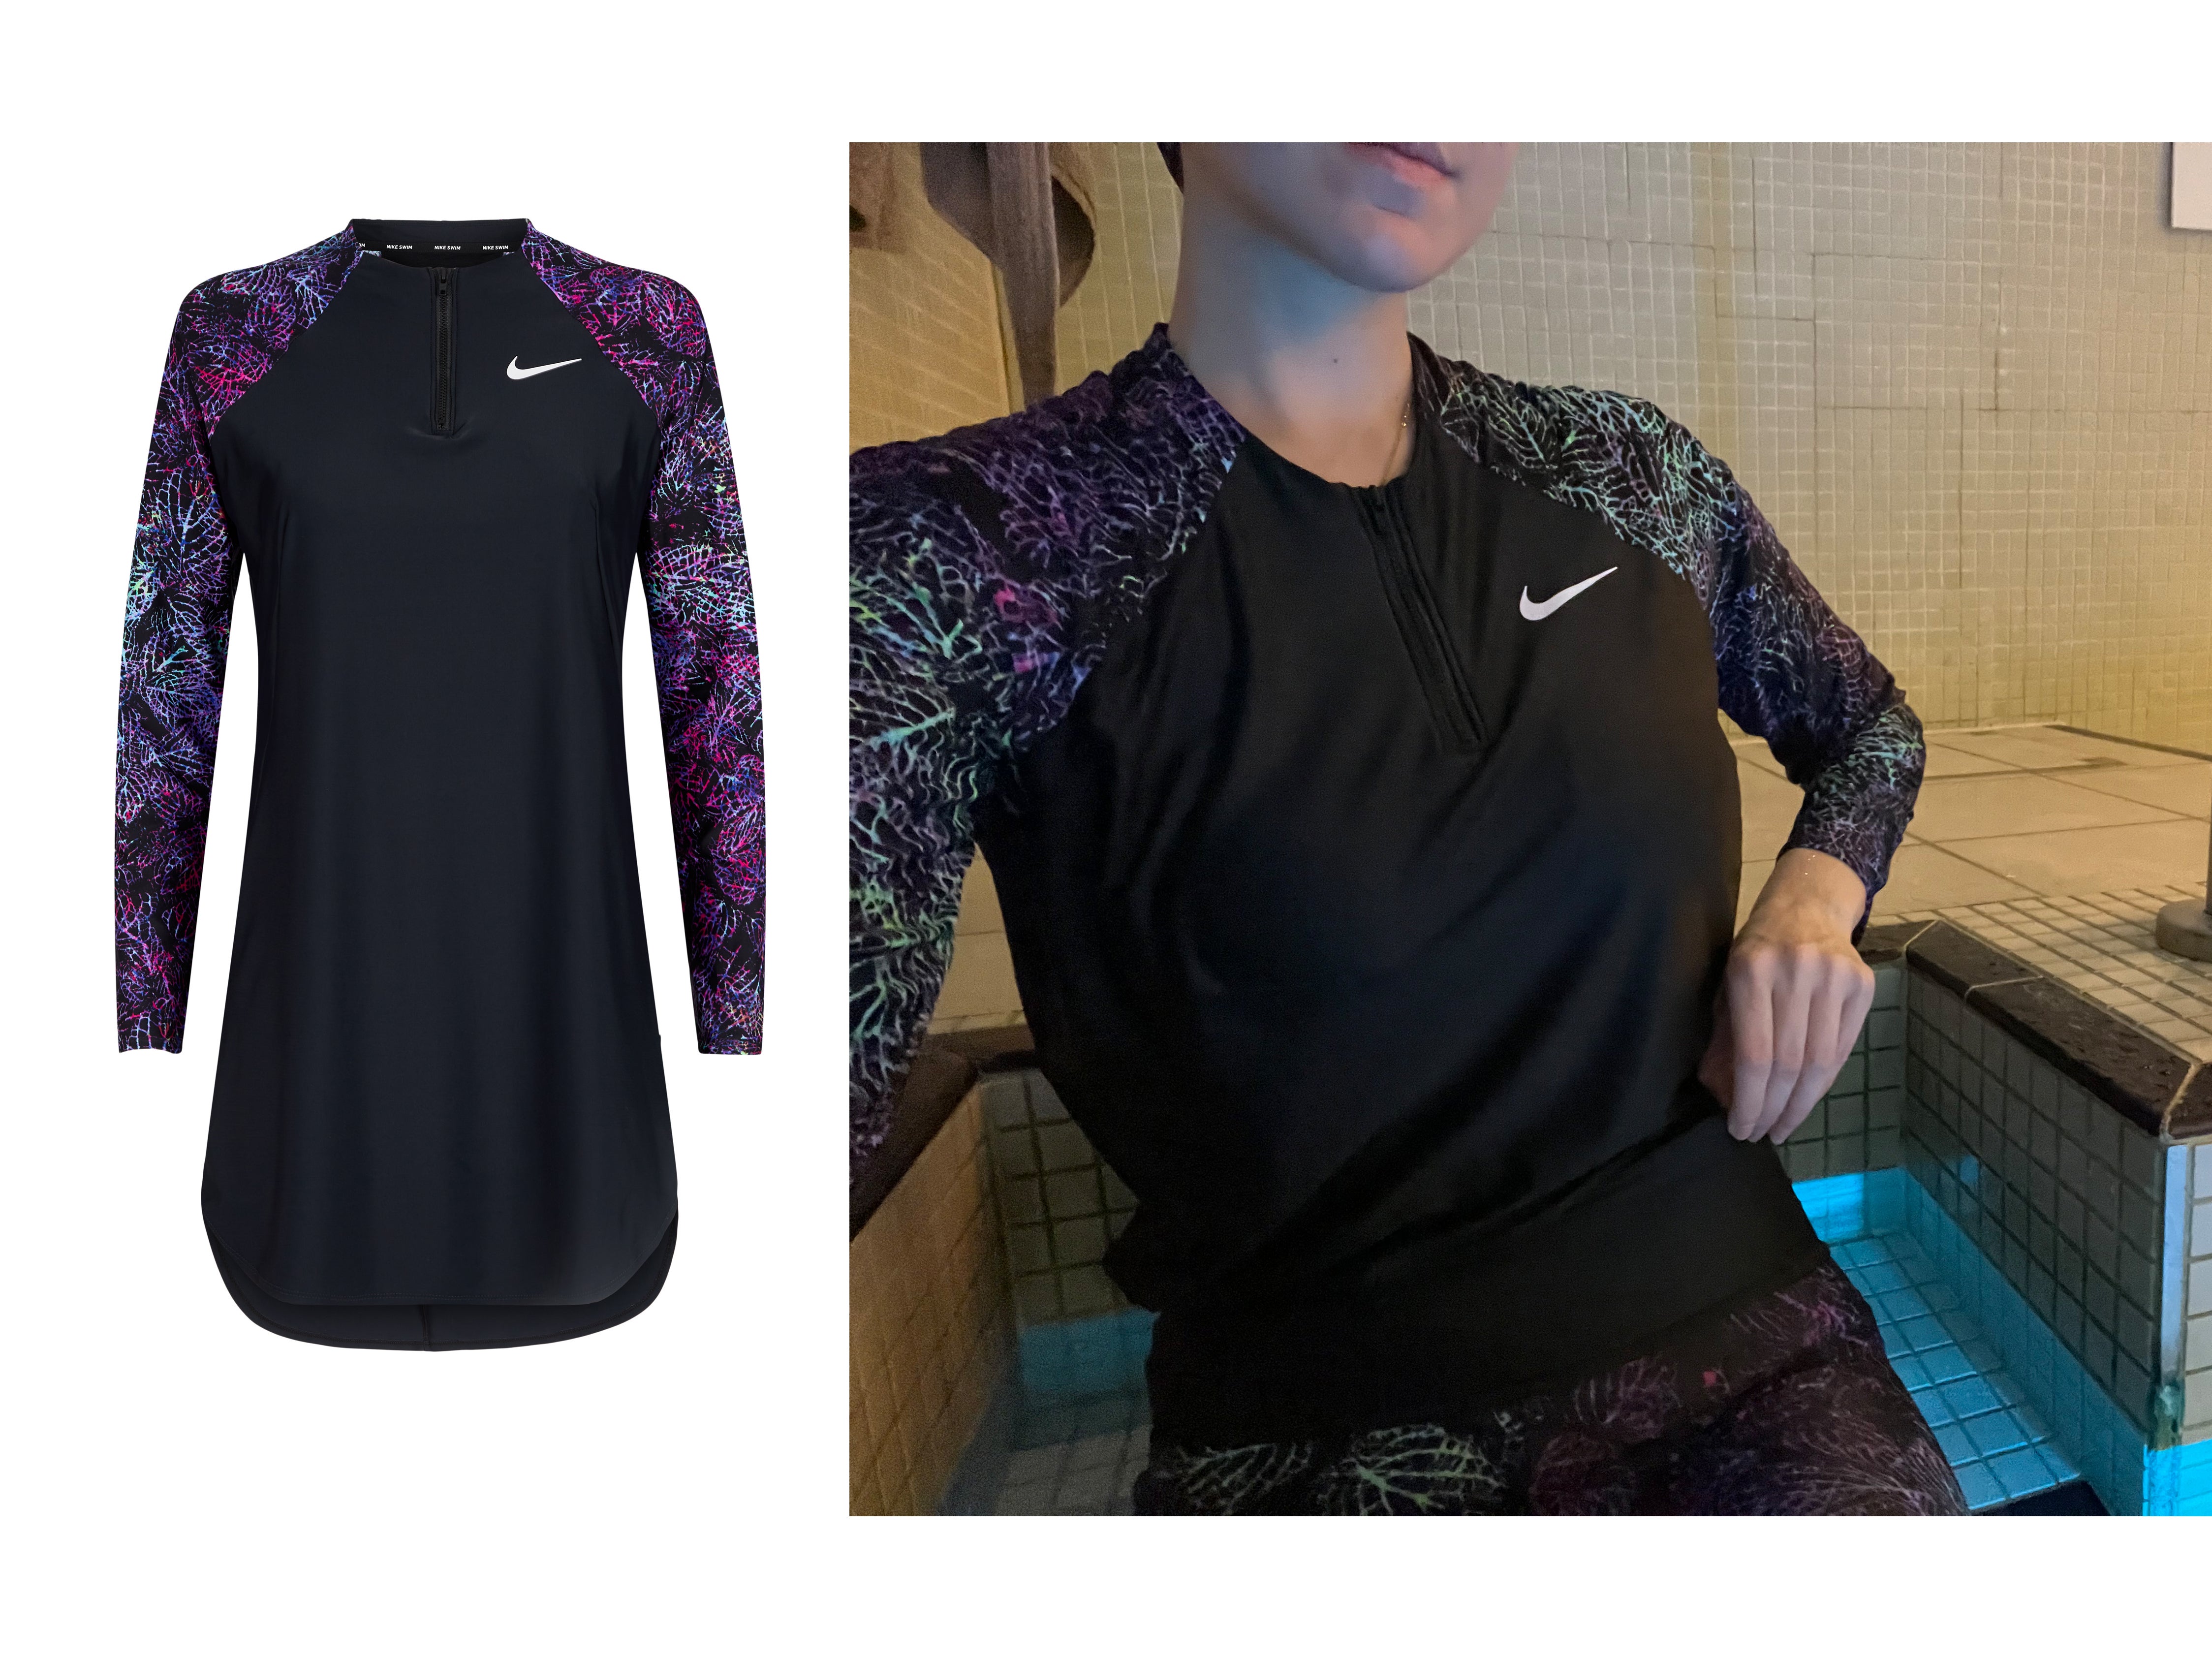 Nike victory swim tunic review: The full collection tried and tested